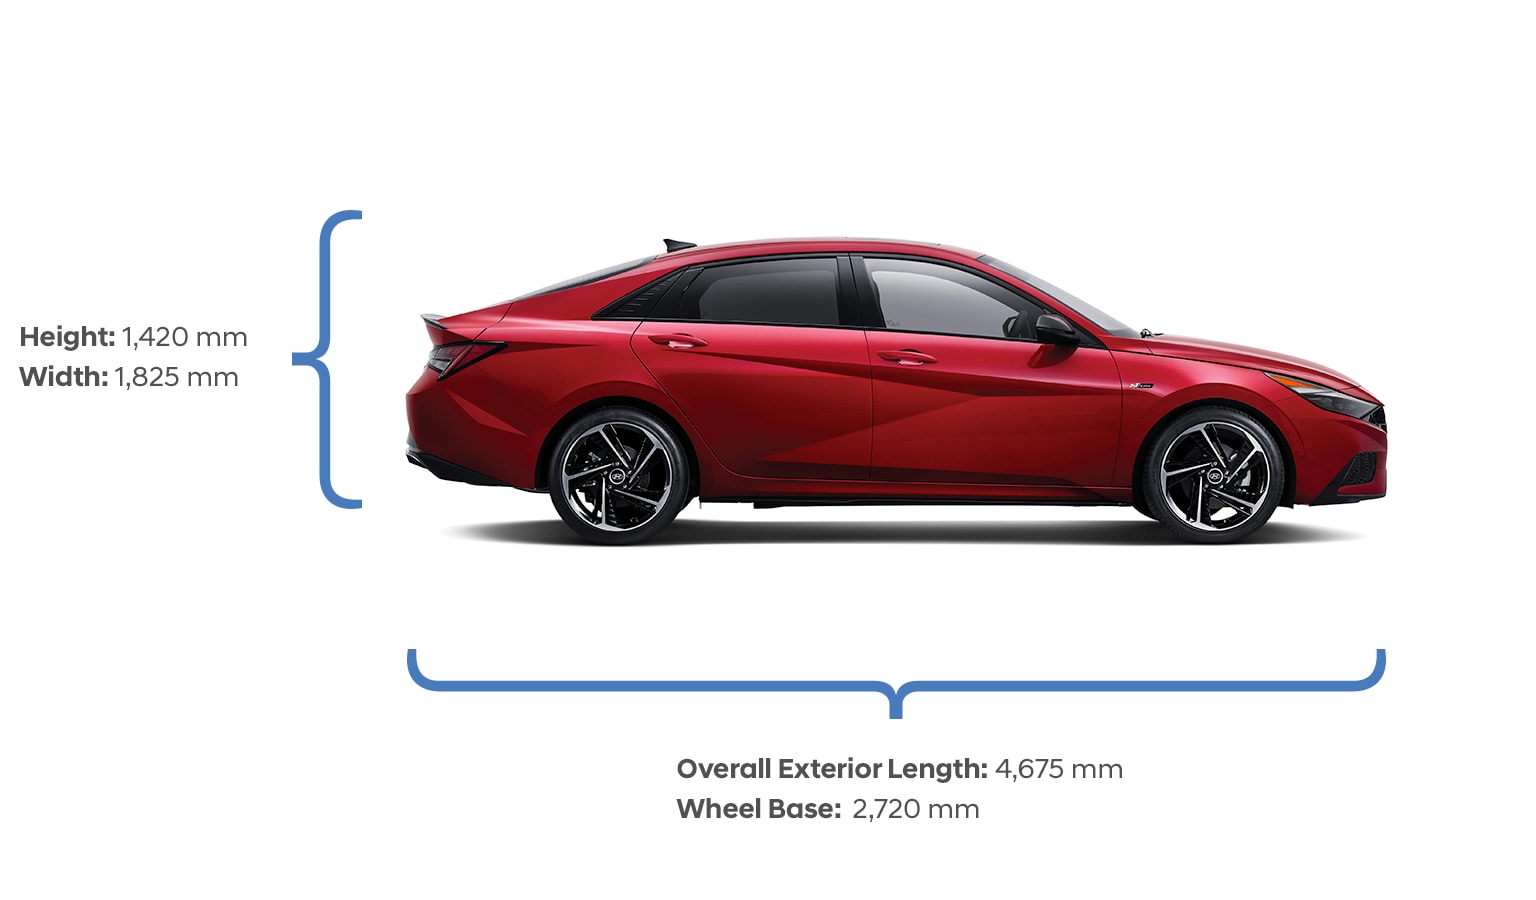 Height and width specifications of the 2021 Elantra N Line